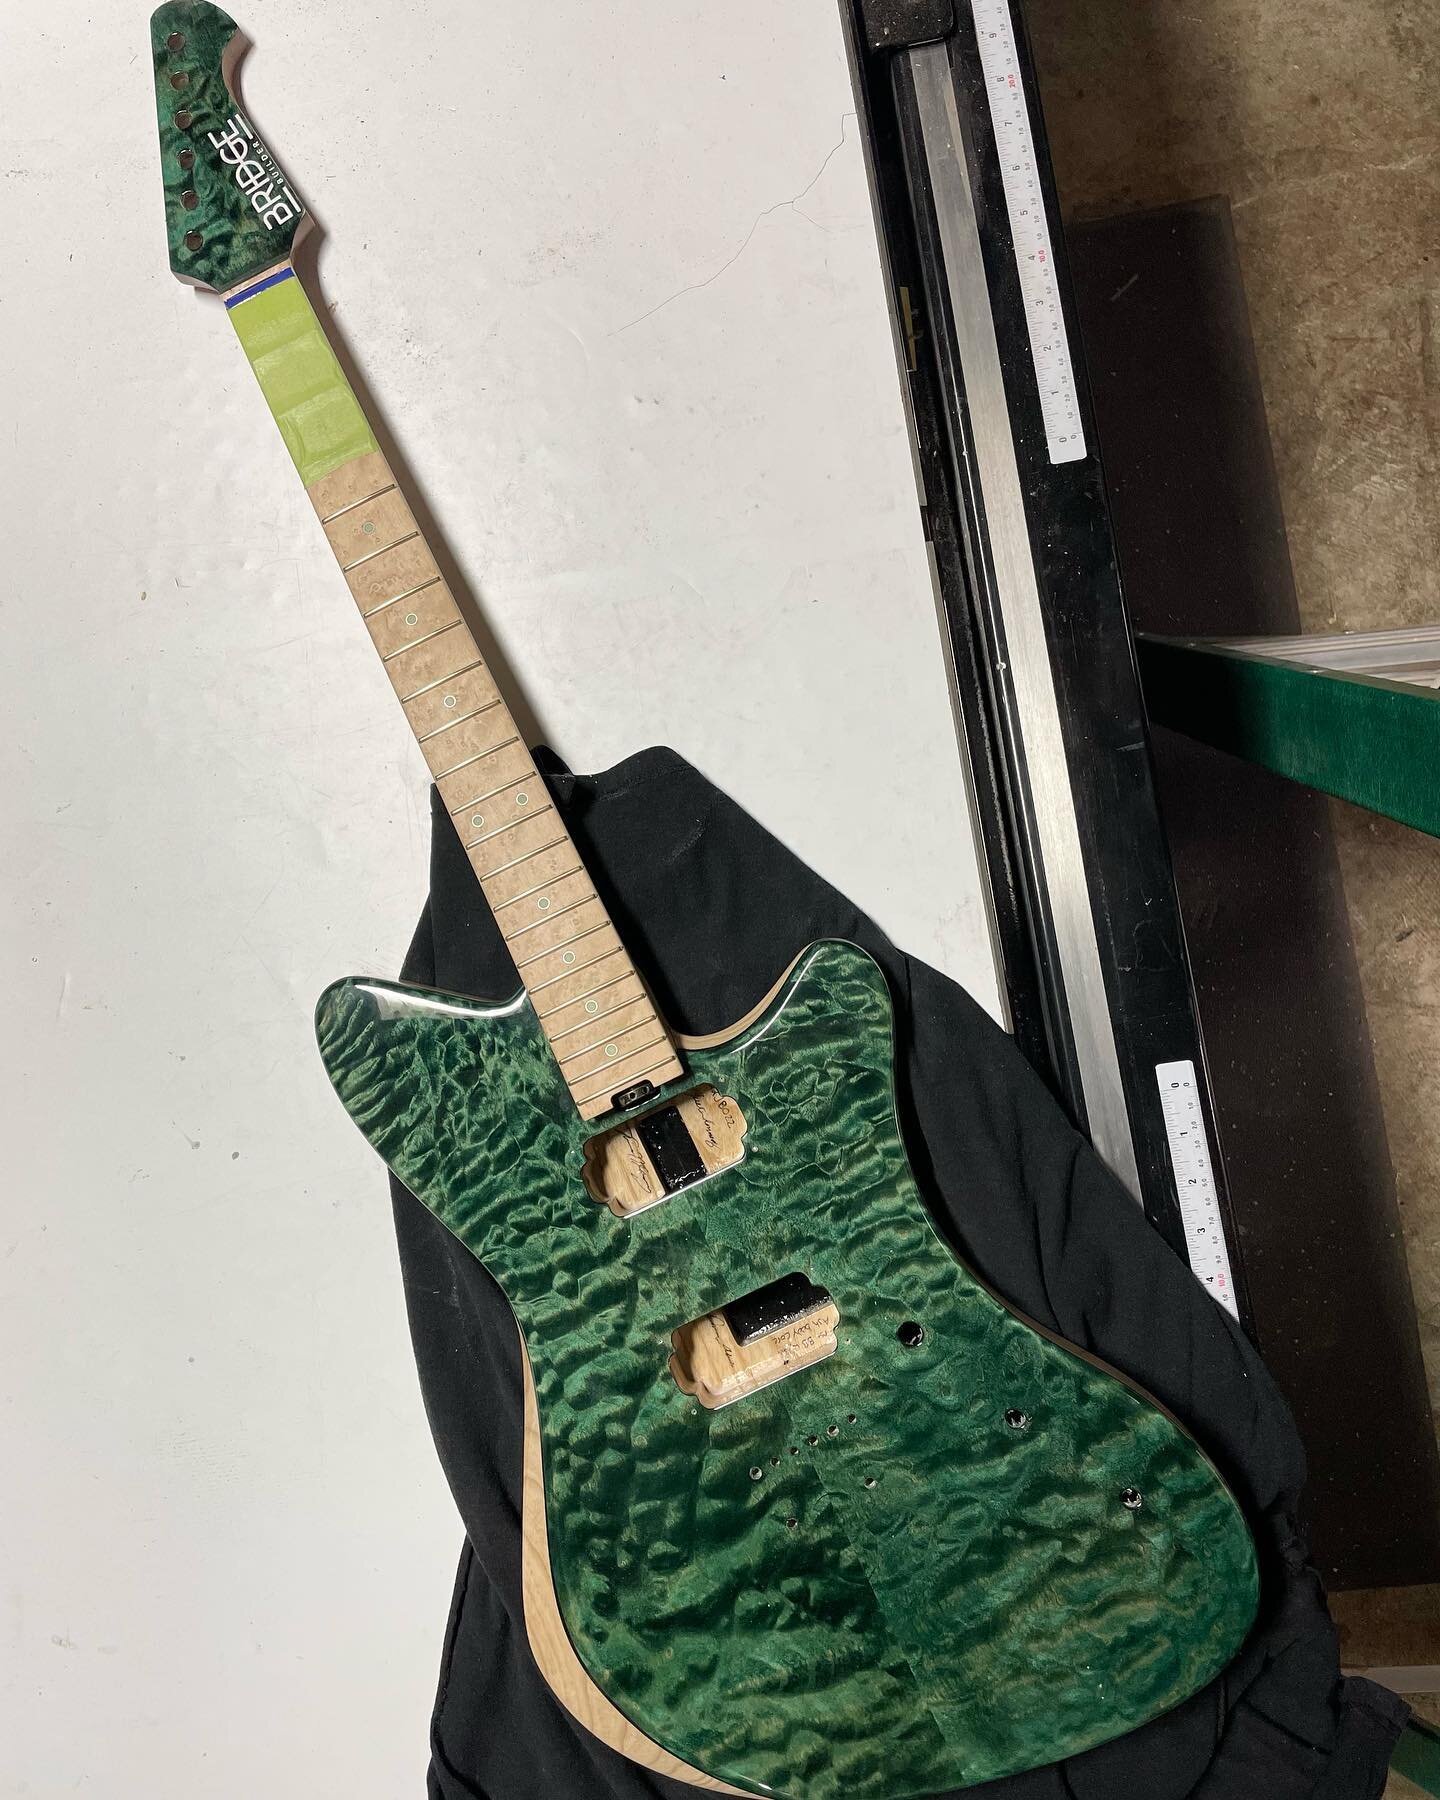 Almost a guitar... 

Also, doing the finish on this thing makes me appreciate @wilkinsguitars @jhayespaint_wilkinsguitars and @r0b1ec even more than I already did!

#bridgebuilderguitars #customguitars #pickups #handbuiltguitars #🎸#🎸🎸🎸 #lutherie 